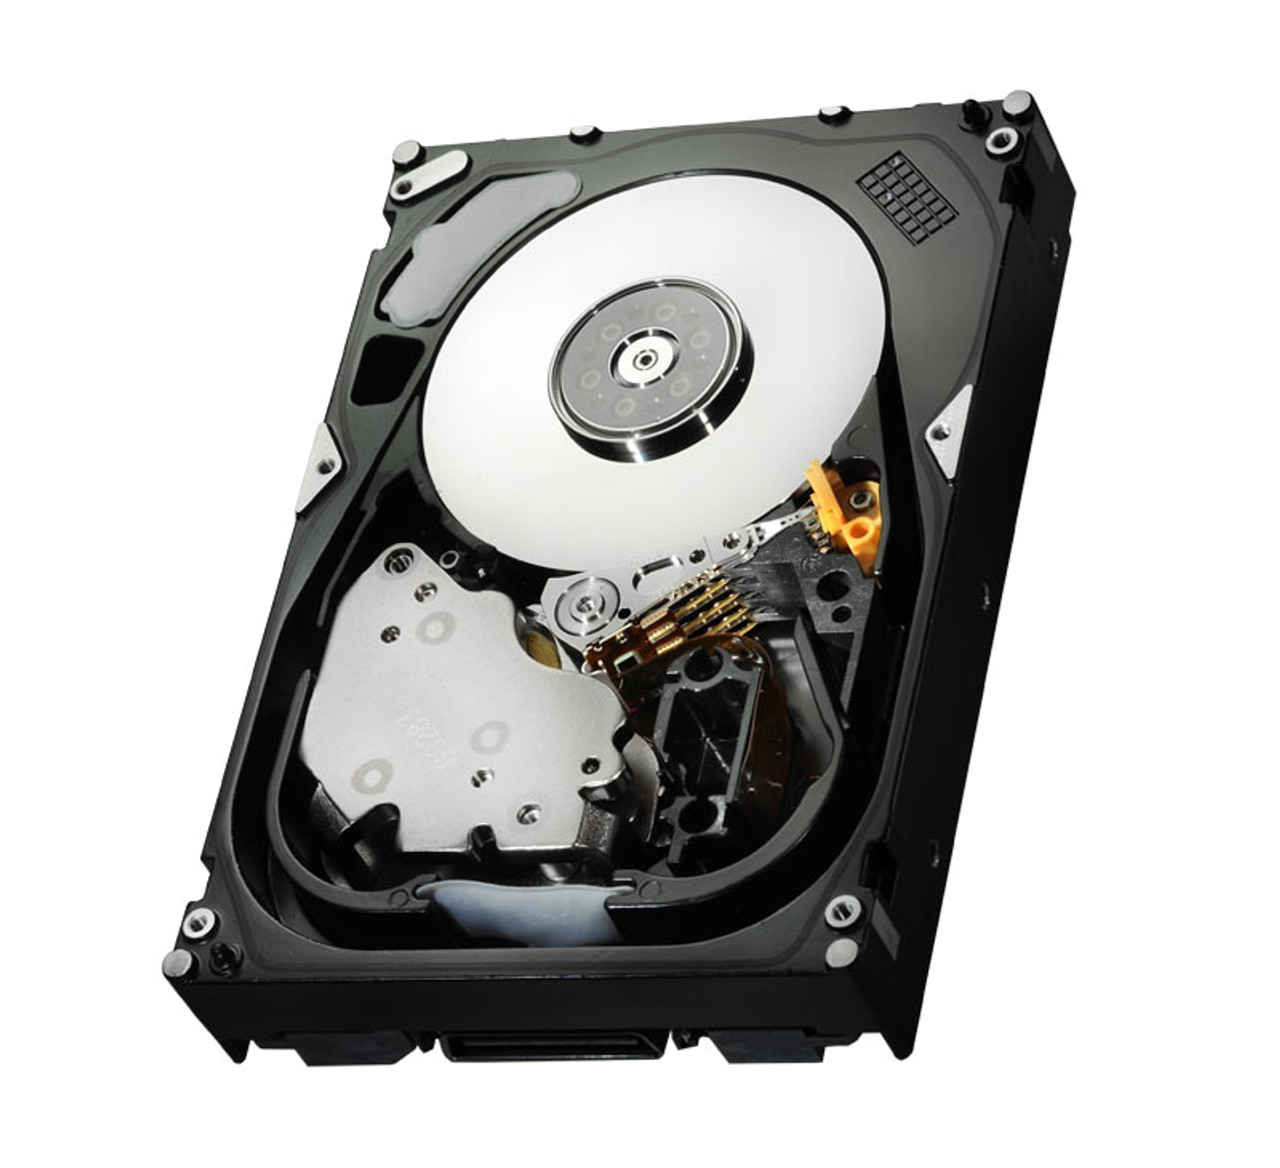 5407159-02 Sun 300GB 15000RPM Fibre Channel 4Gbps 16MB Cache 3.5-inch Internal Hard Drive with Bracket